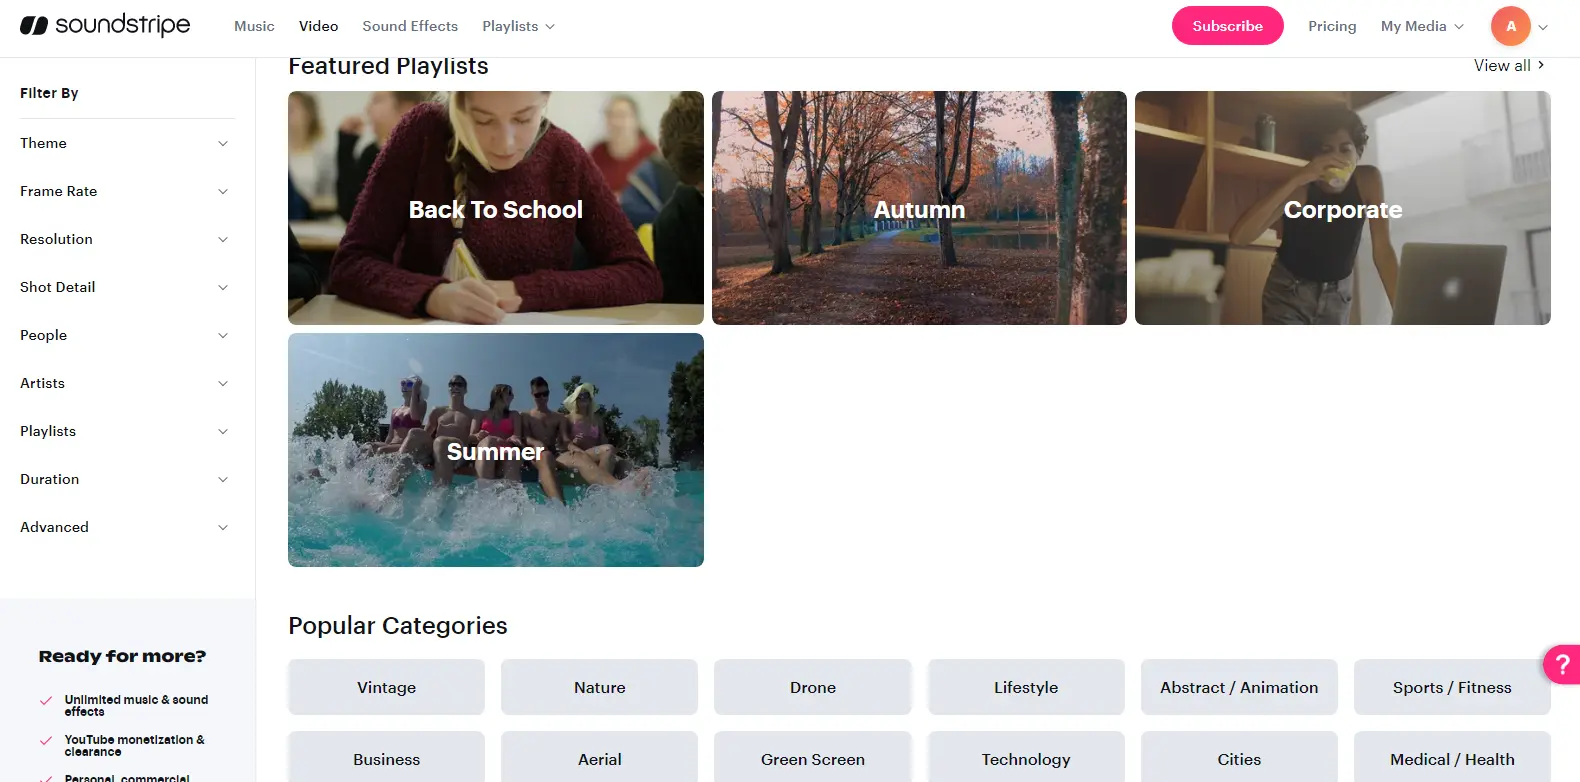 Soundstripe Video - Shows the video content section in Soundstripe, featuring stock footage and video clips for creative projects.